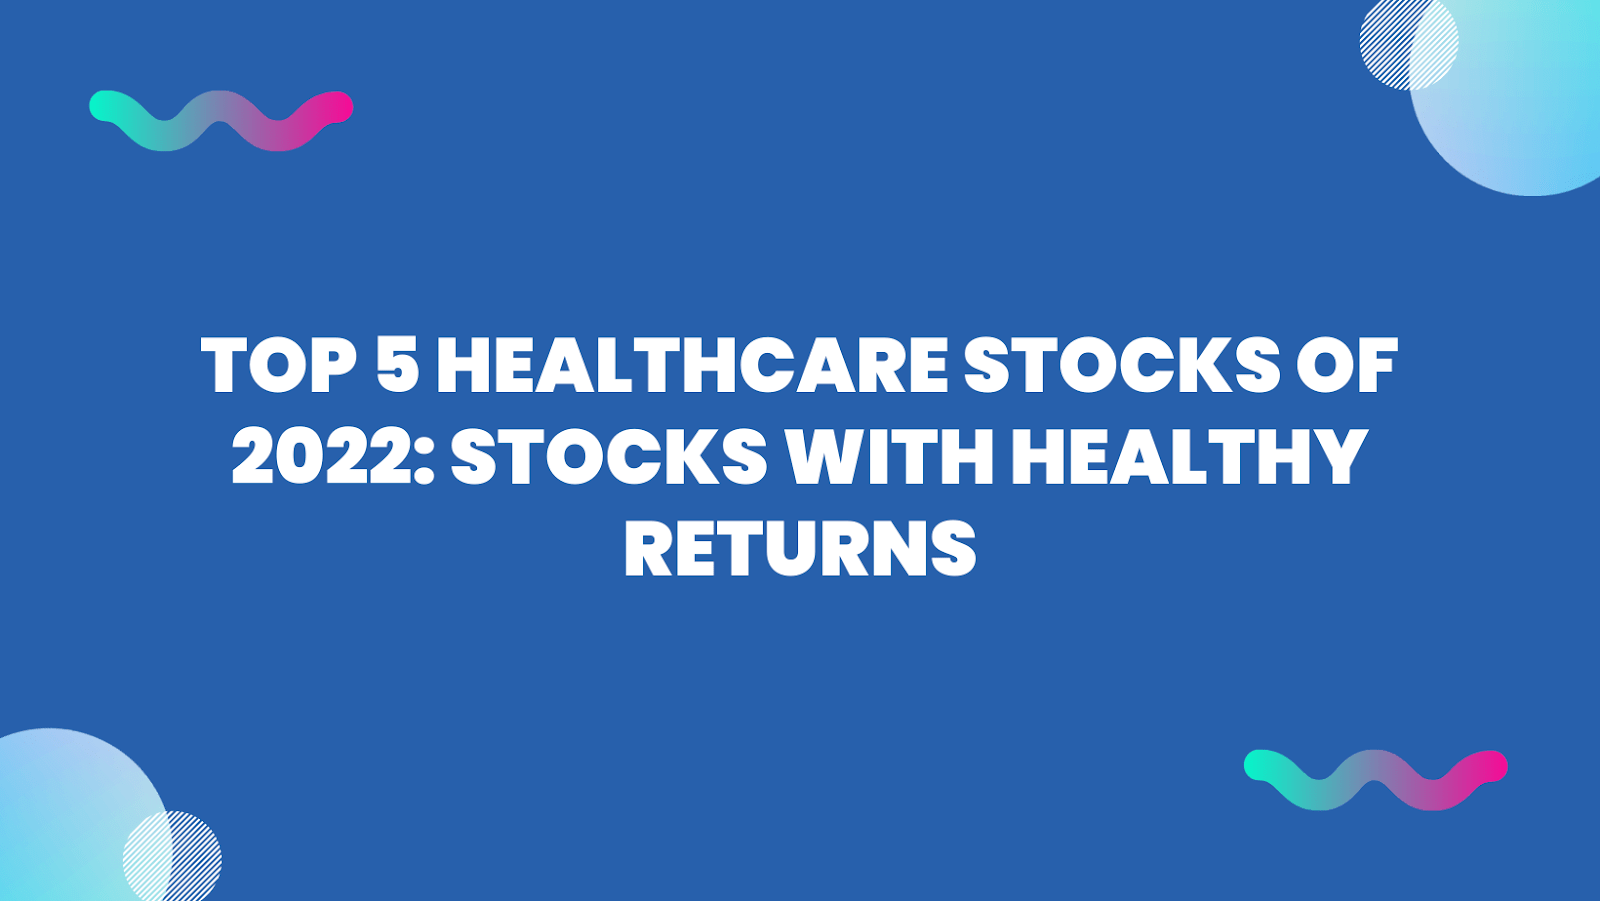 Top 5 Healthcare stocks of 2022 Stocks With Healthy Returns